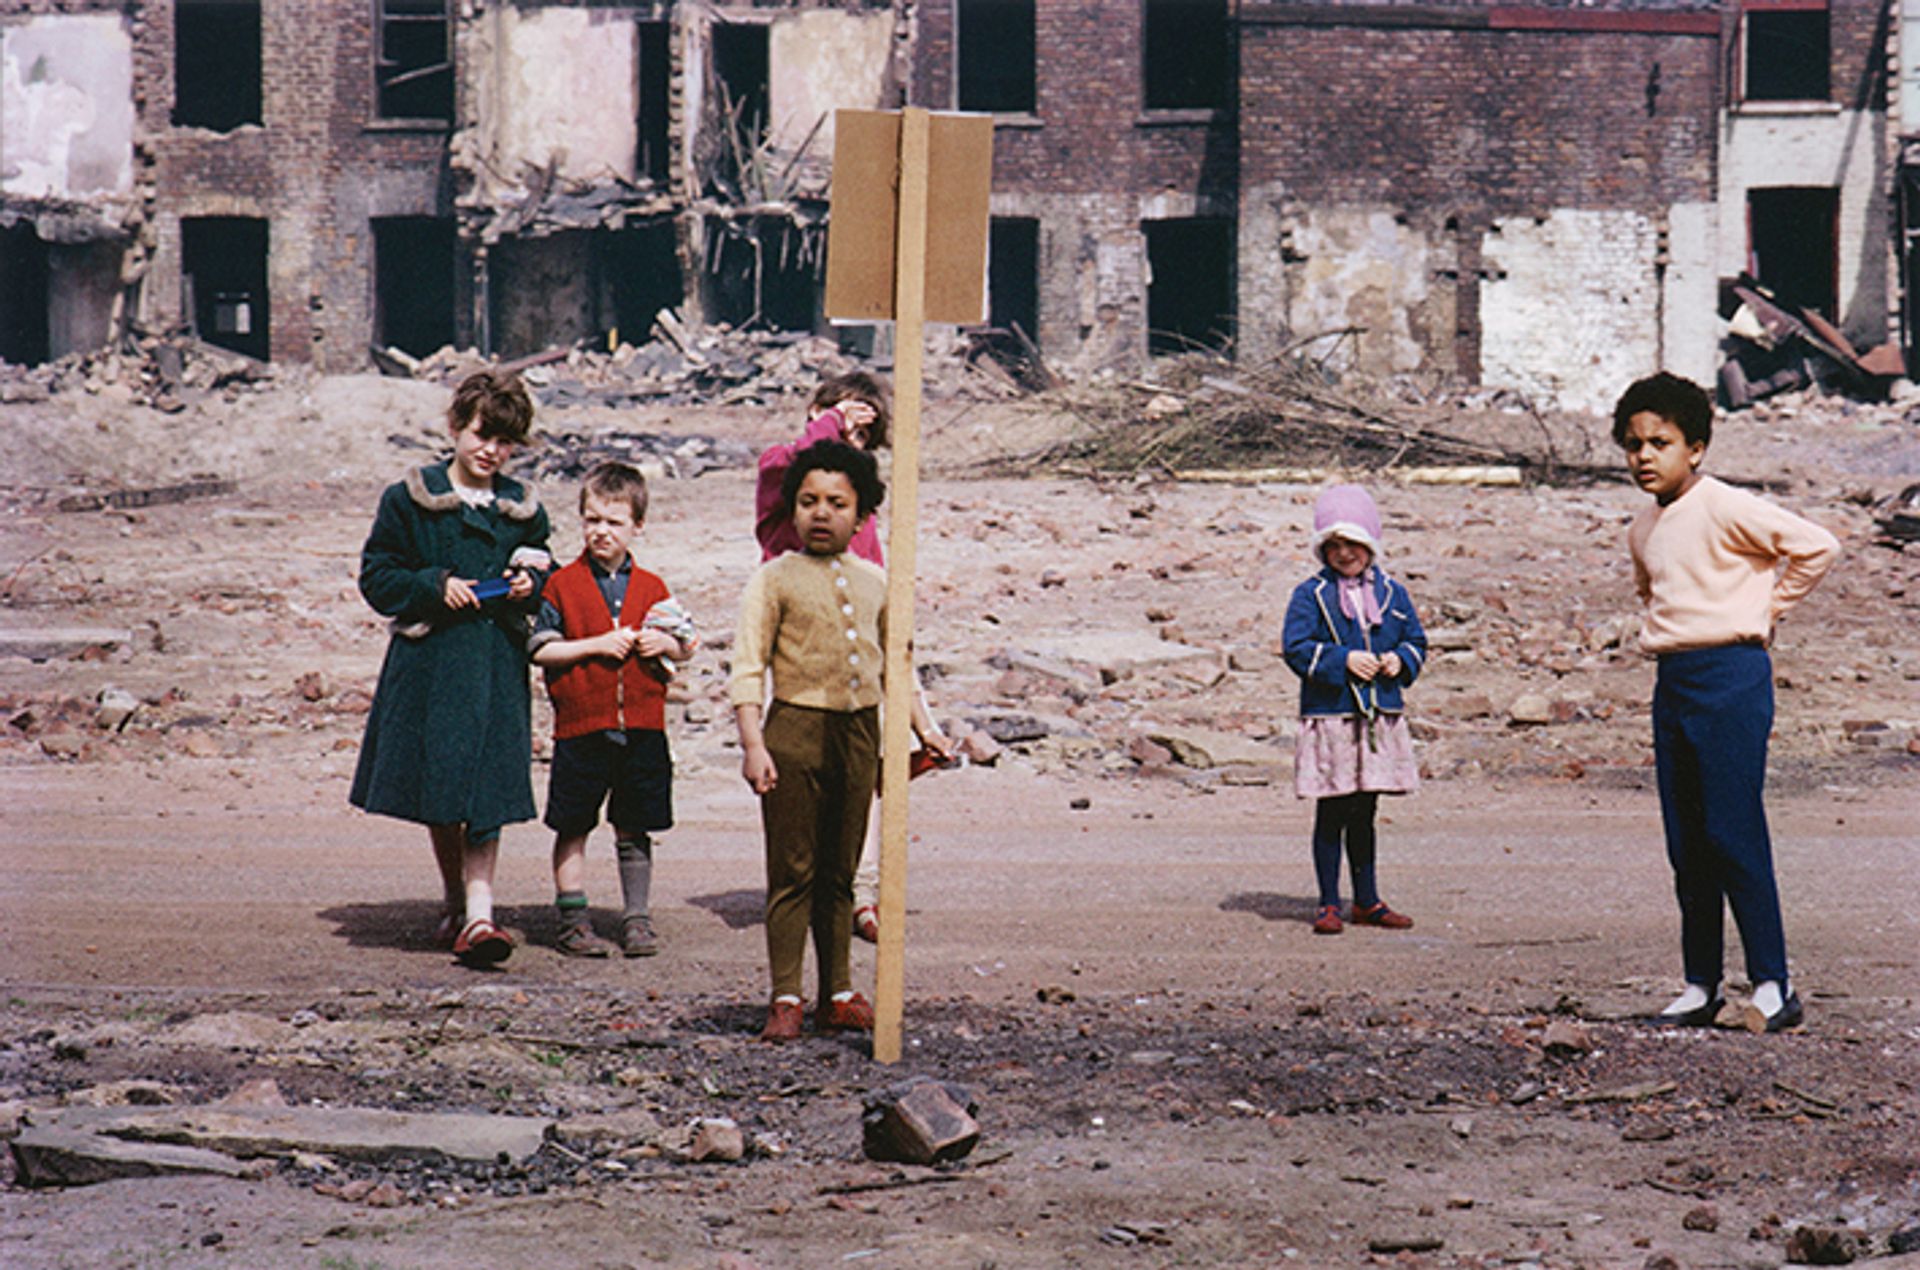 The photographer Shirley Baker documented some of the poorest districts in Manchester, such as Hulme, photographed here in 1965 © Mary Evans Picture Library 2021